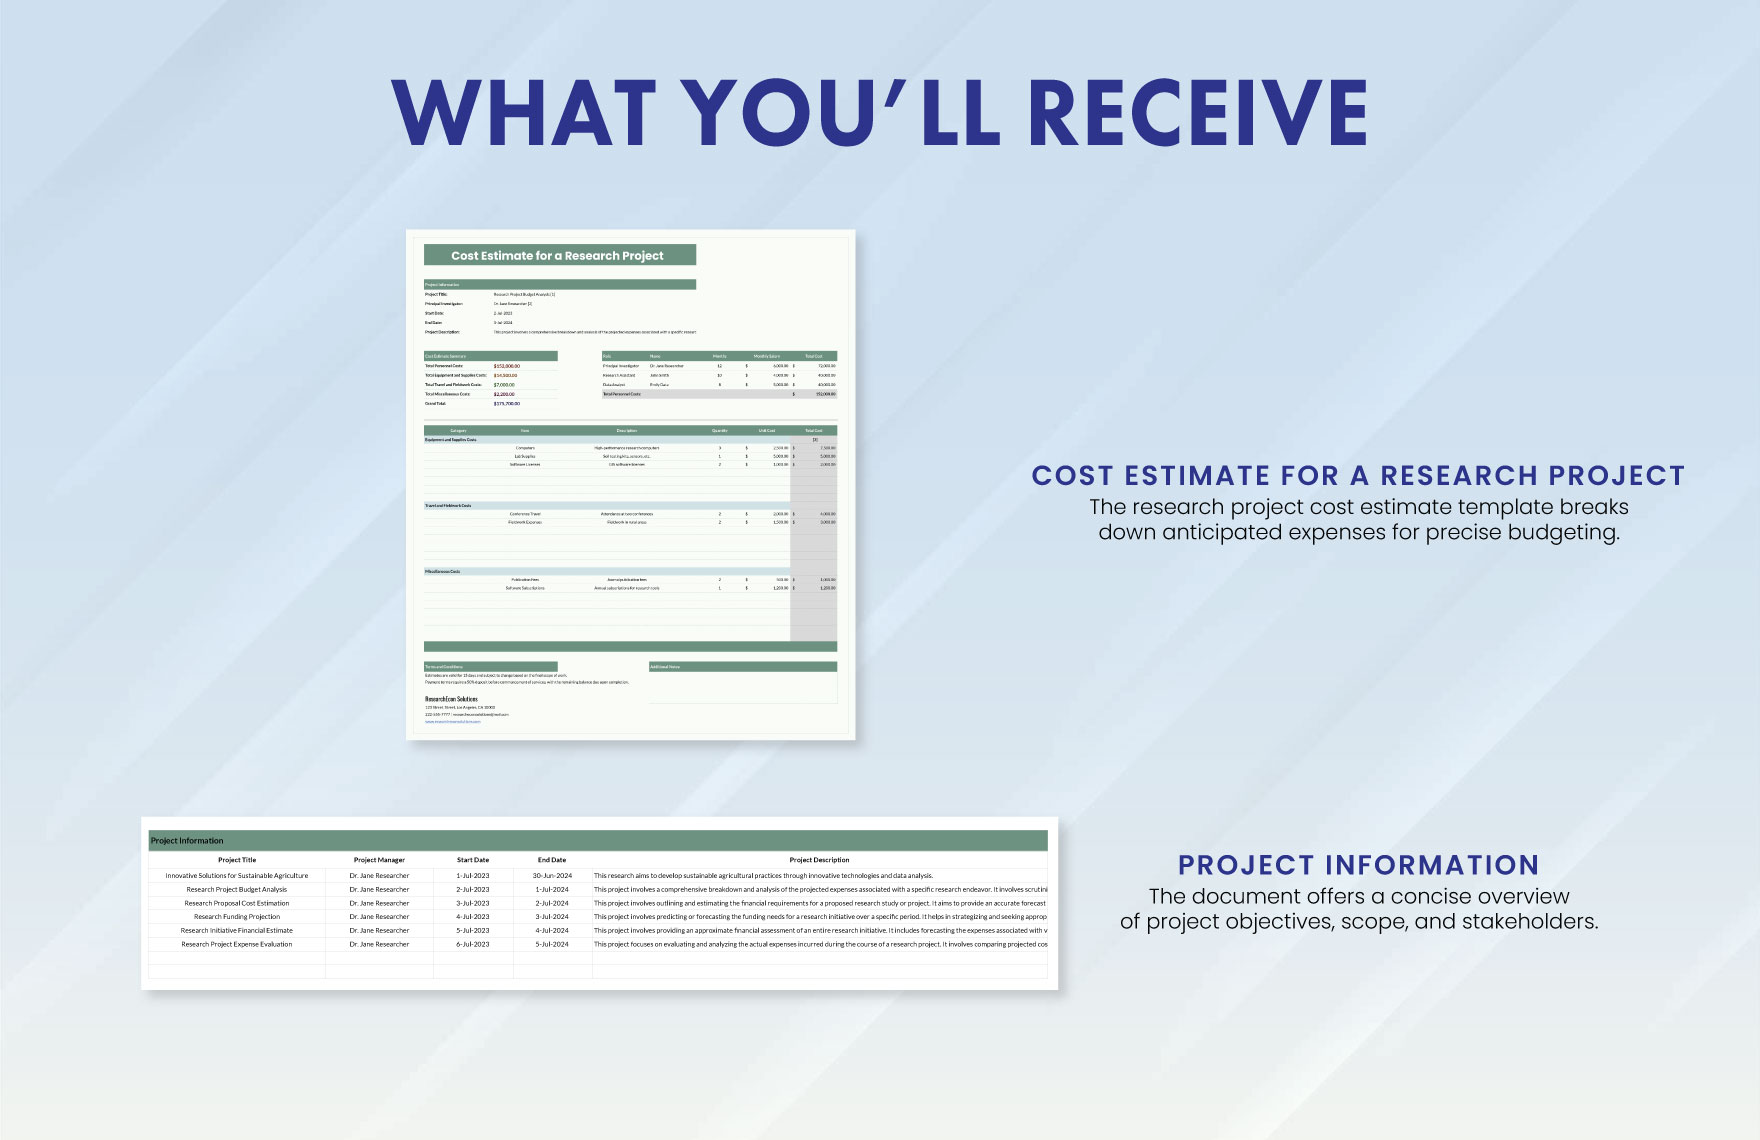 Cost Estimate for a Research Project Template